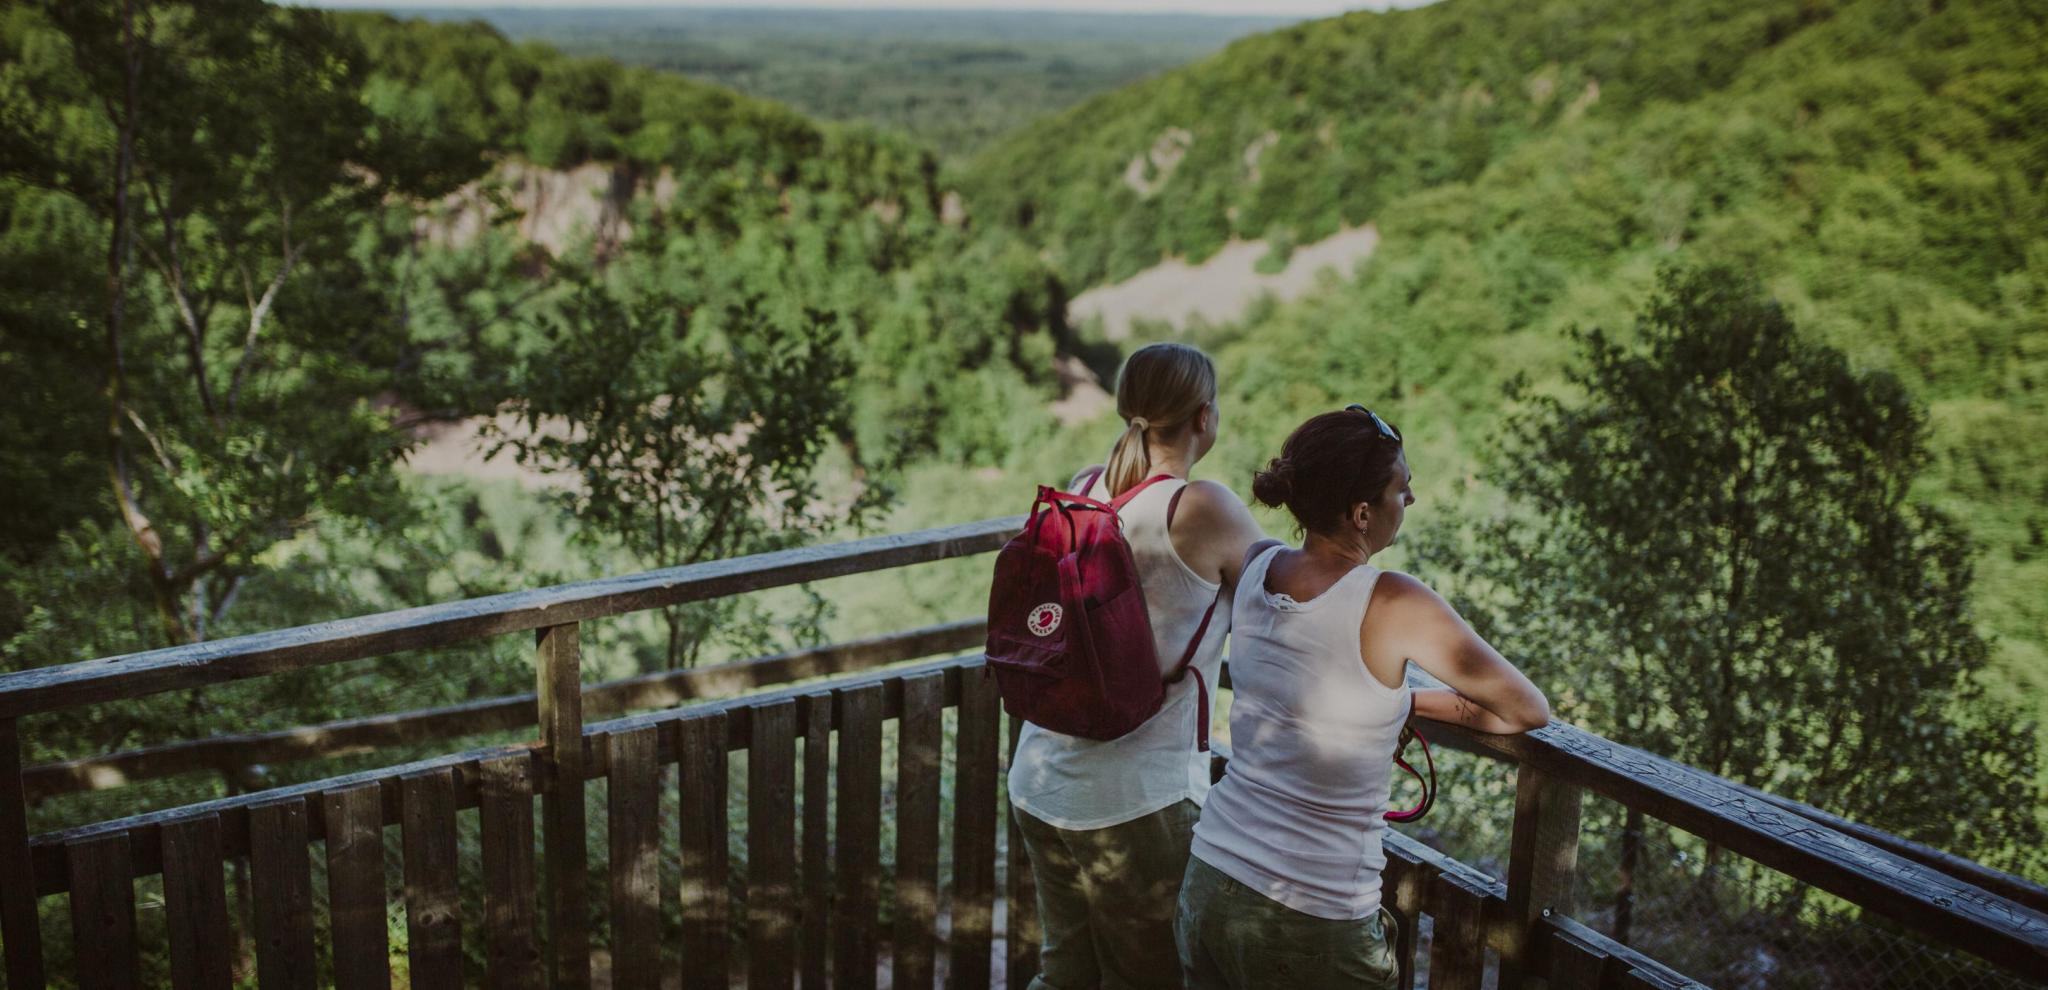 Two women enjoying the view over a valley in Söderåsen national park